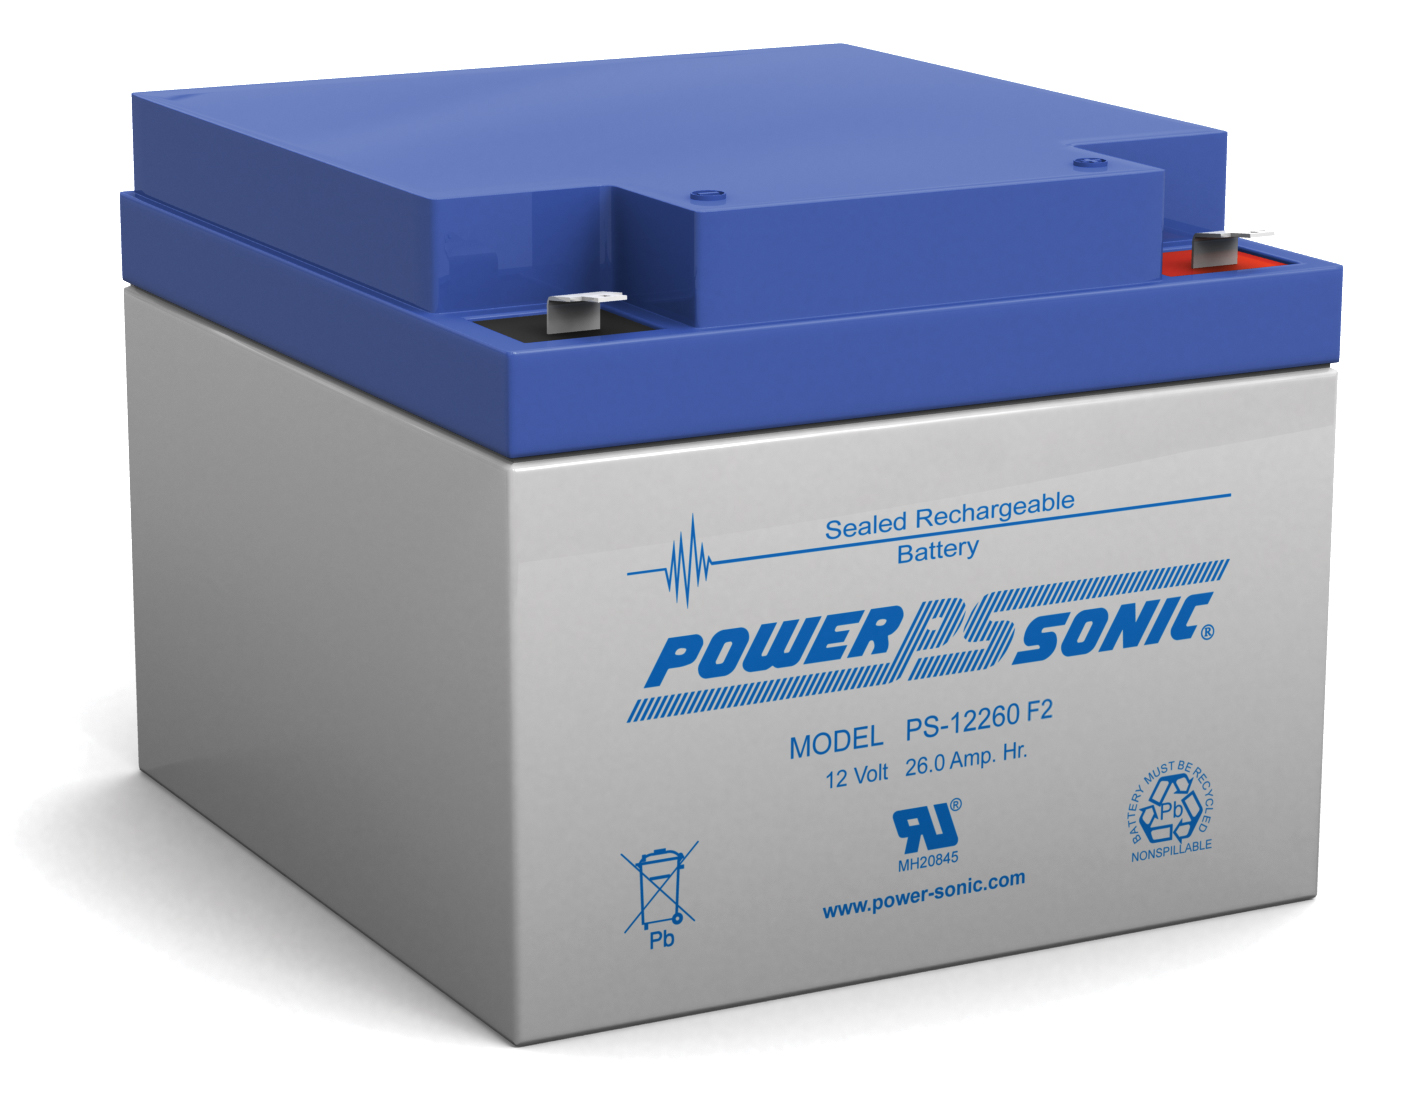 Powersonic 12V 26AH Battery - Kiesub - Electronic equipment, parts and accessories distributor